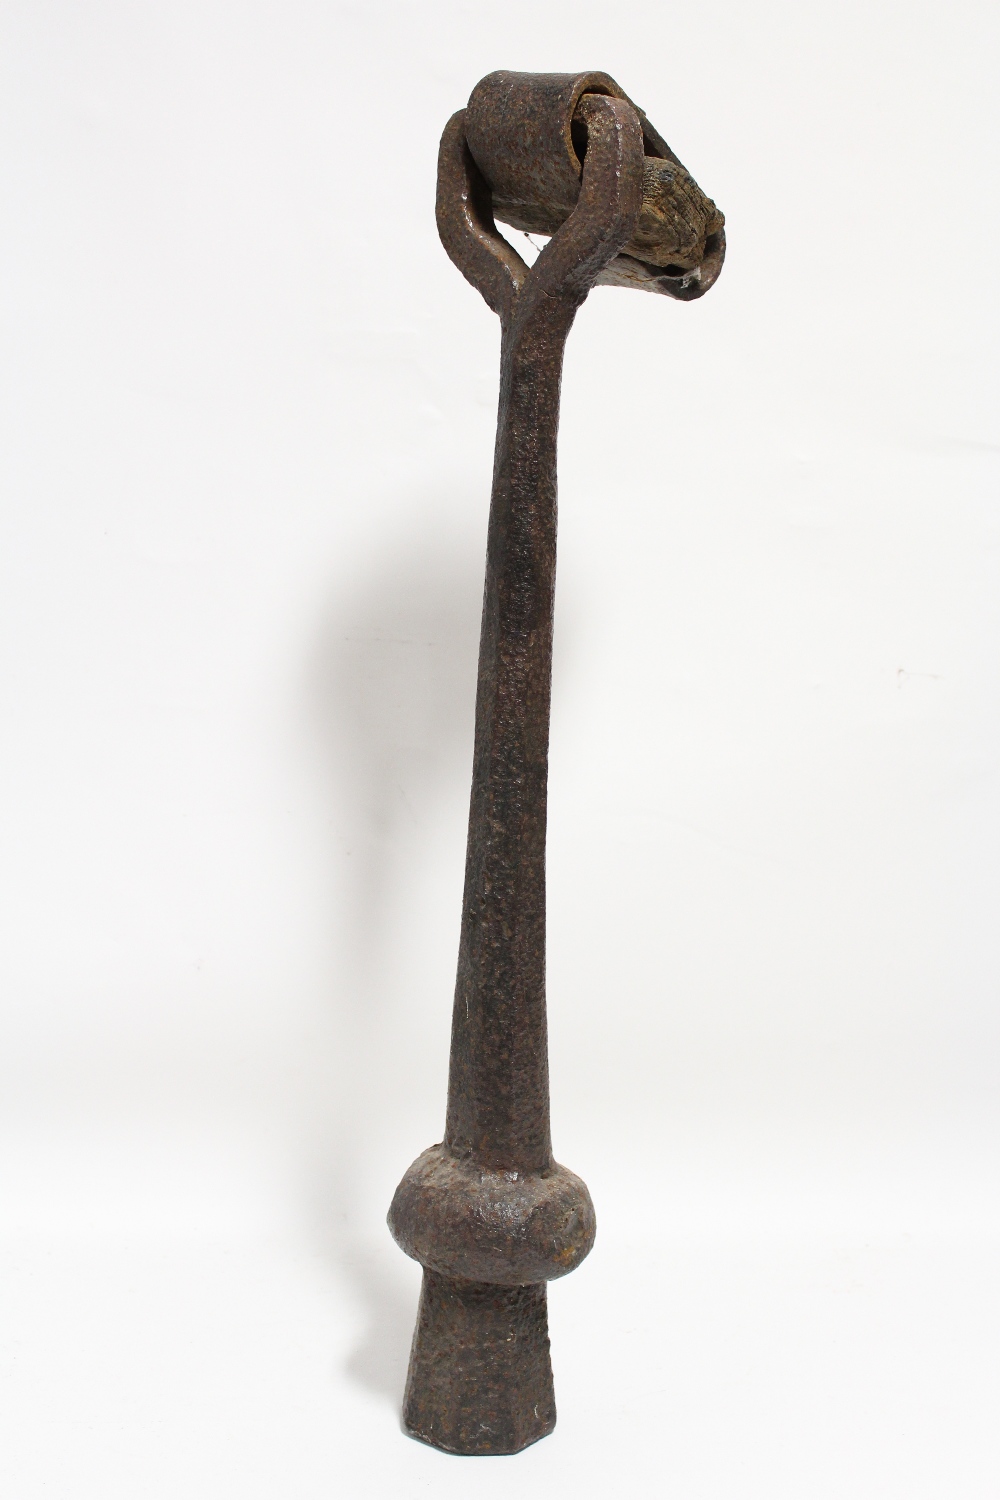 A large wrought iron bell clapper, 26” long reputedly originating from Worcester Cathedral.